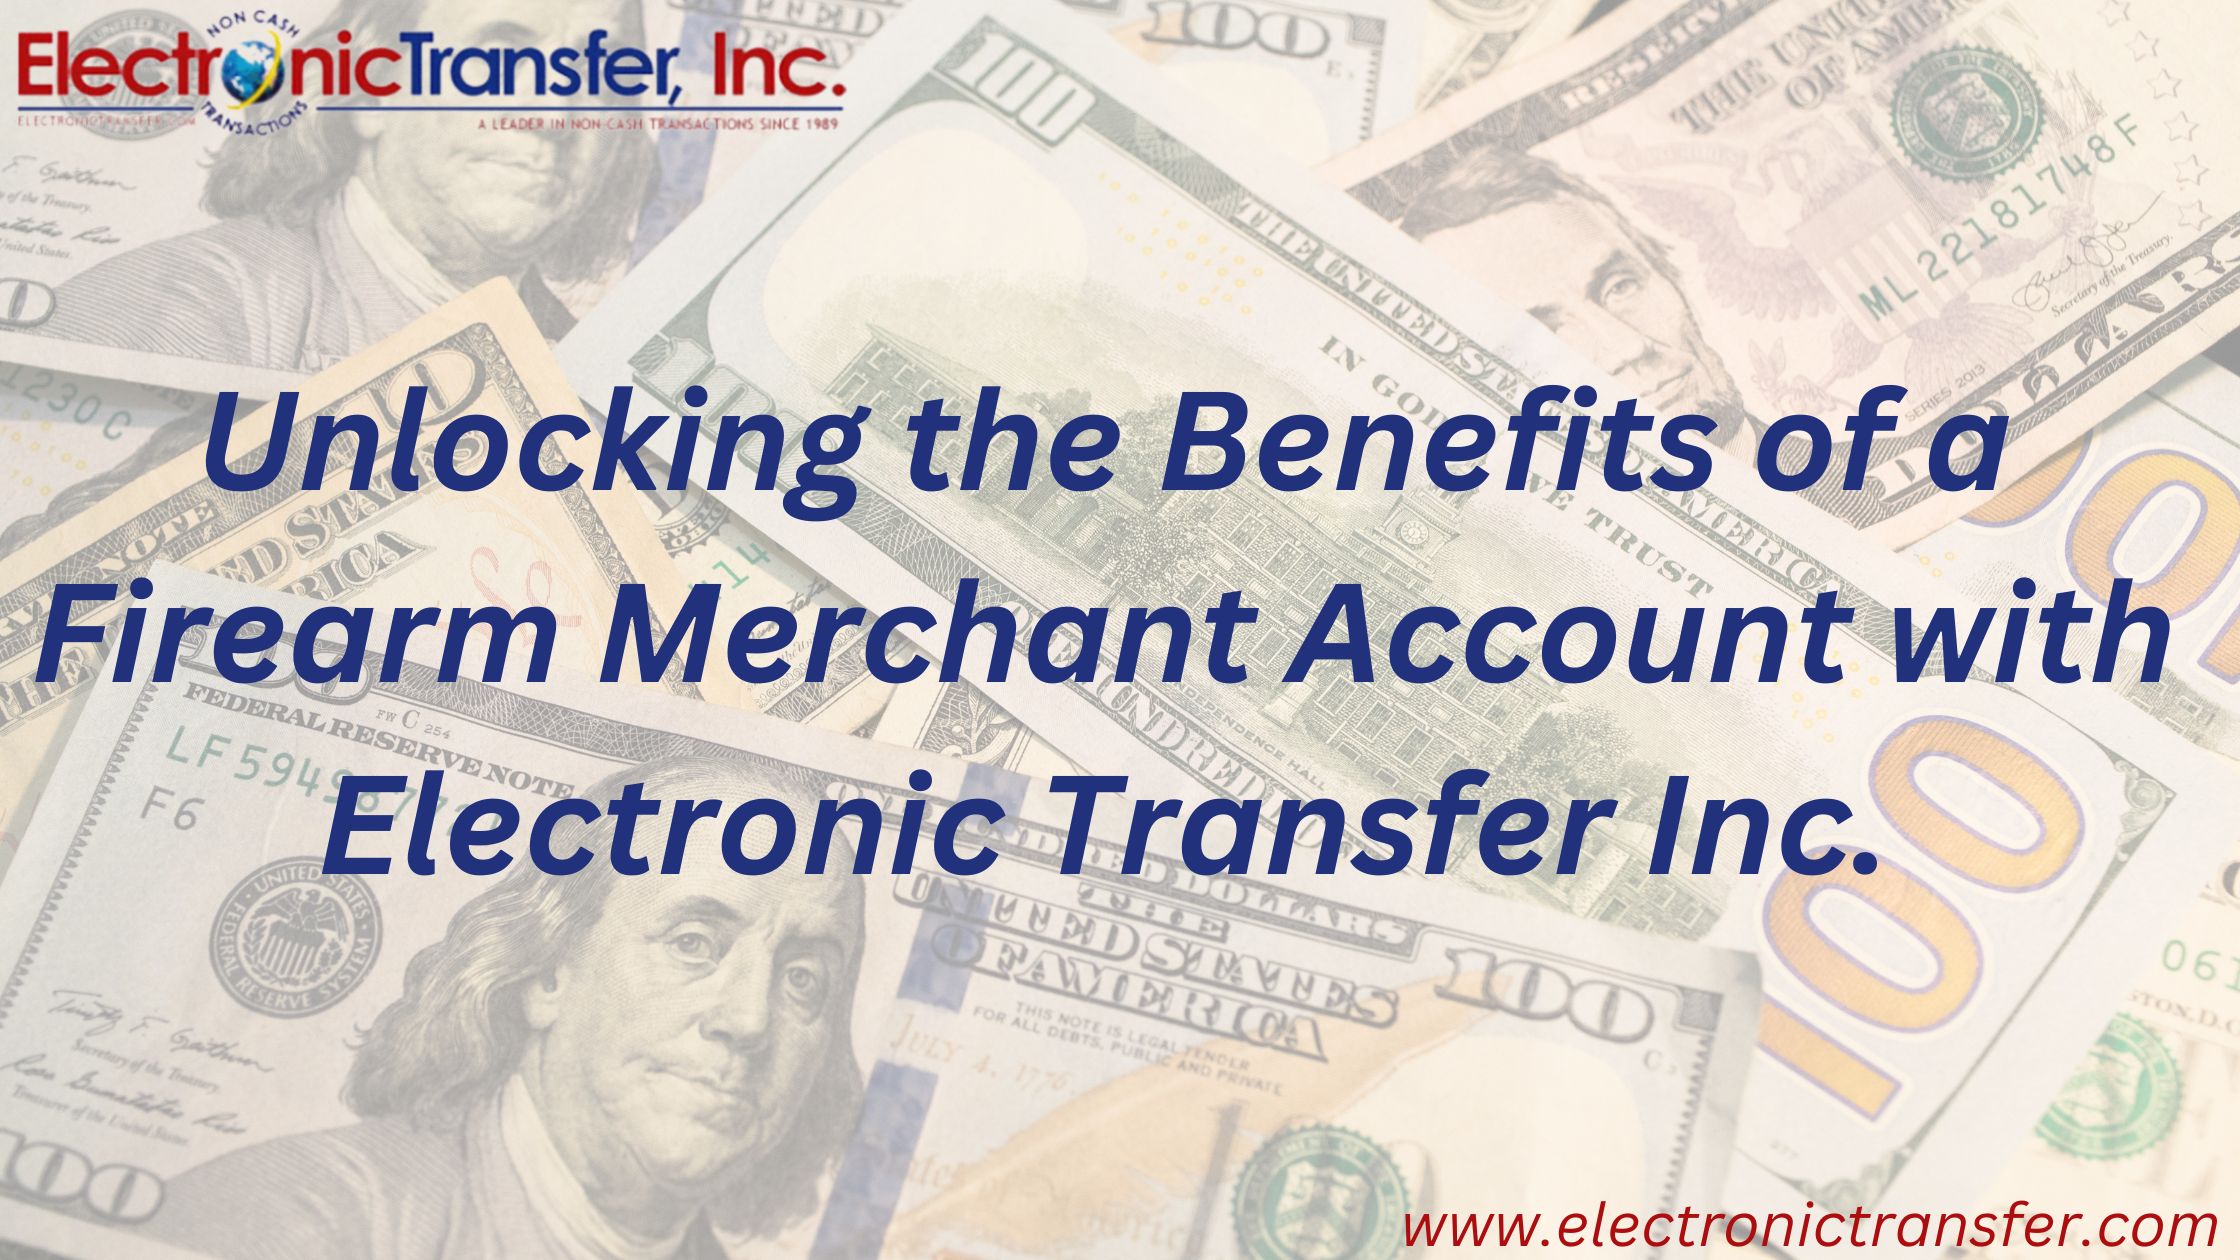 Unlocking the Benefits of a Firearm Merchant Account with Electronic Transfer Inc.